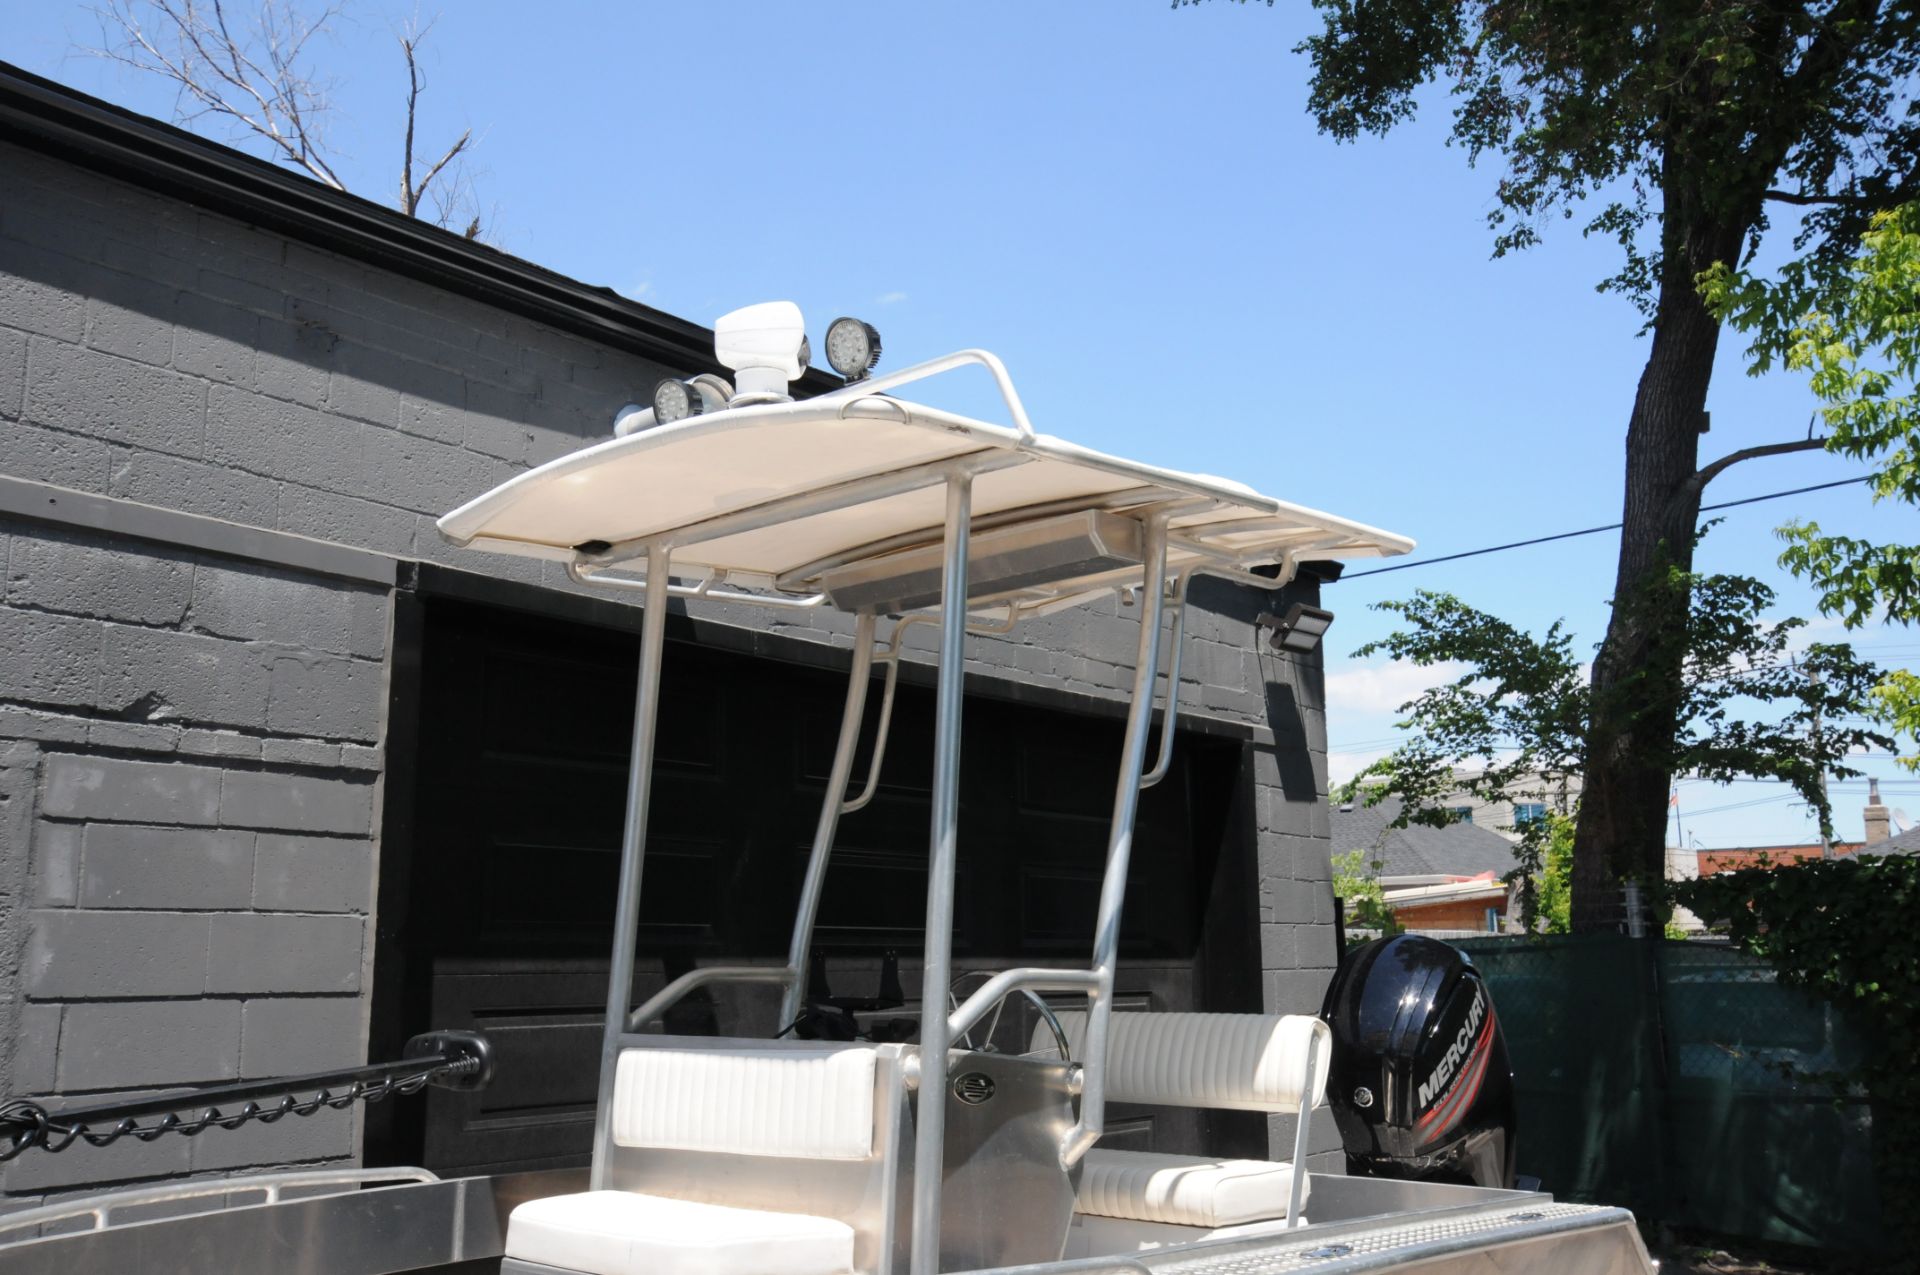 BAYVIEW BOATS (2013) PROFISHER 16 CENTER CONSOLE ALUMINUM FISHING BOAT ALL WELDED CONSTRUCTION - Image 19 of 21